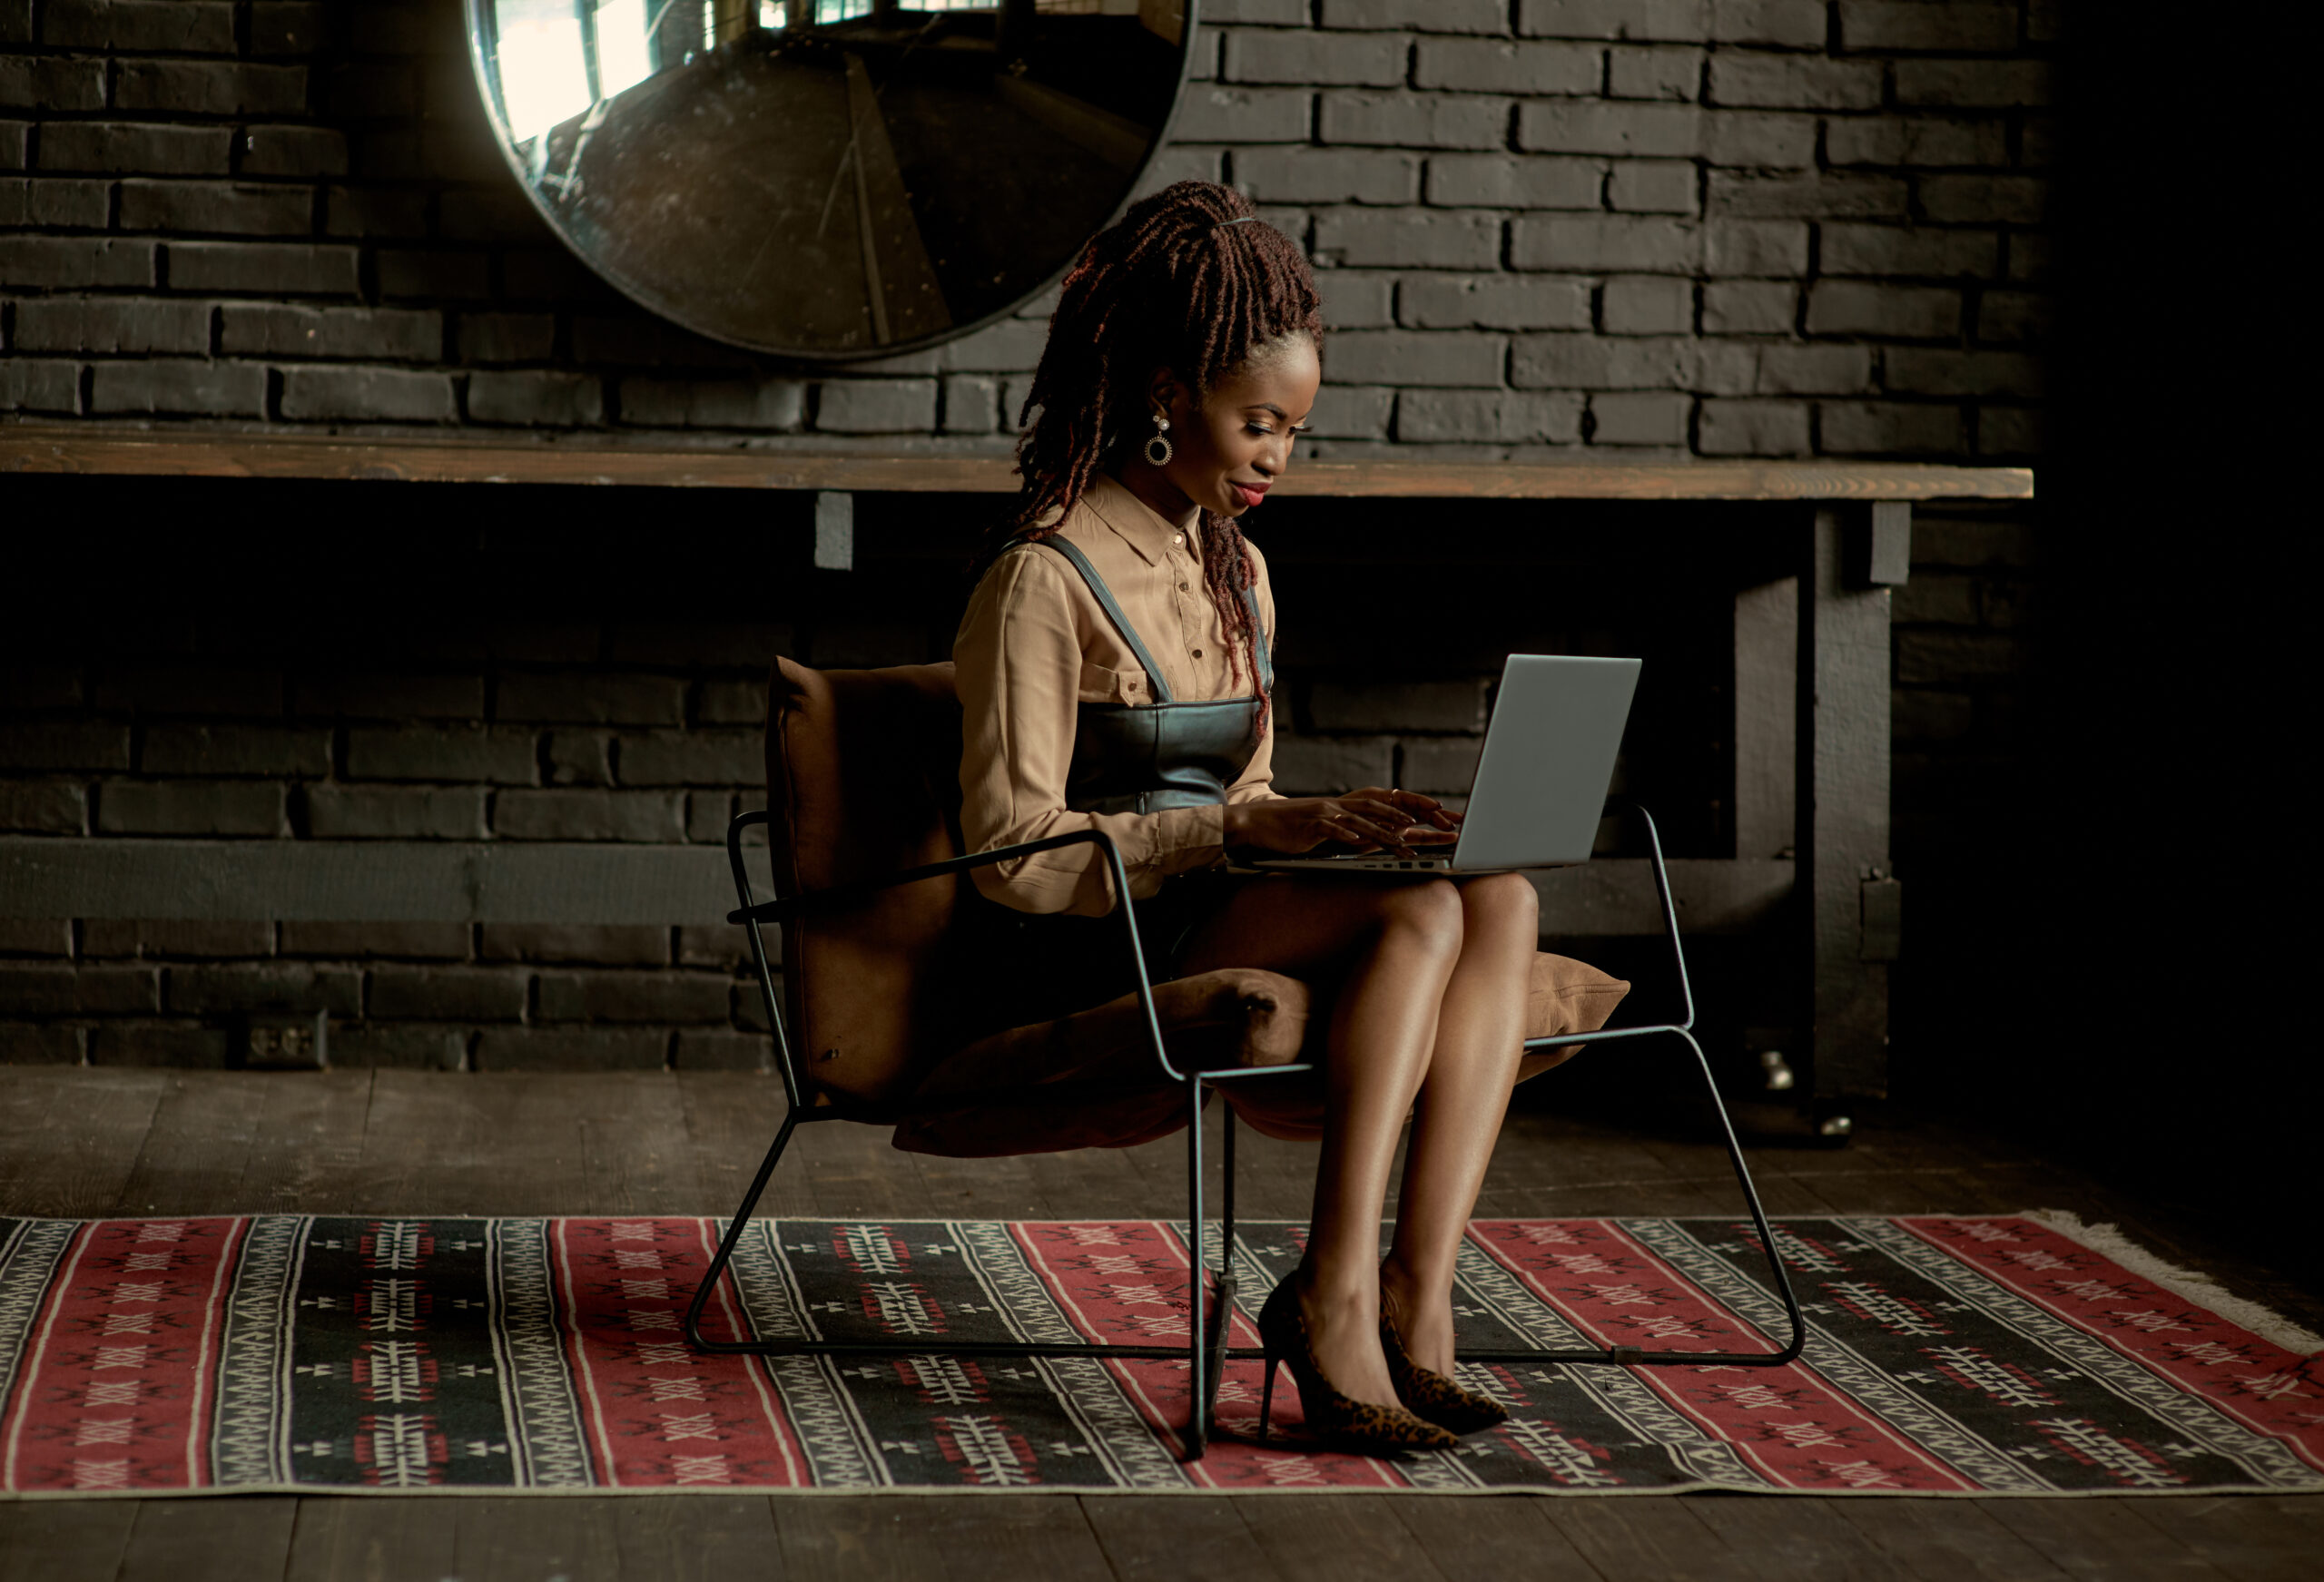 A focused individual participating in a Master Social Media Coaching Programme, attentively working on a laptop in a chic, rustic room with a brick wall background.